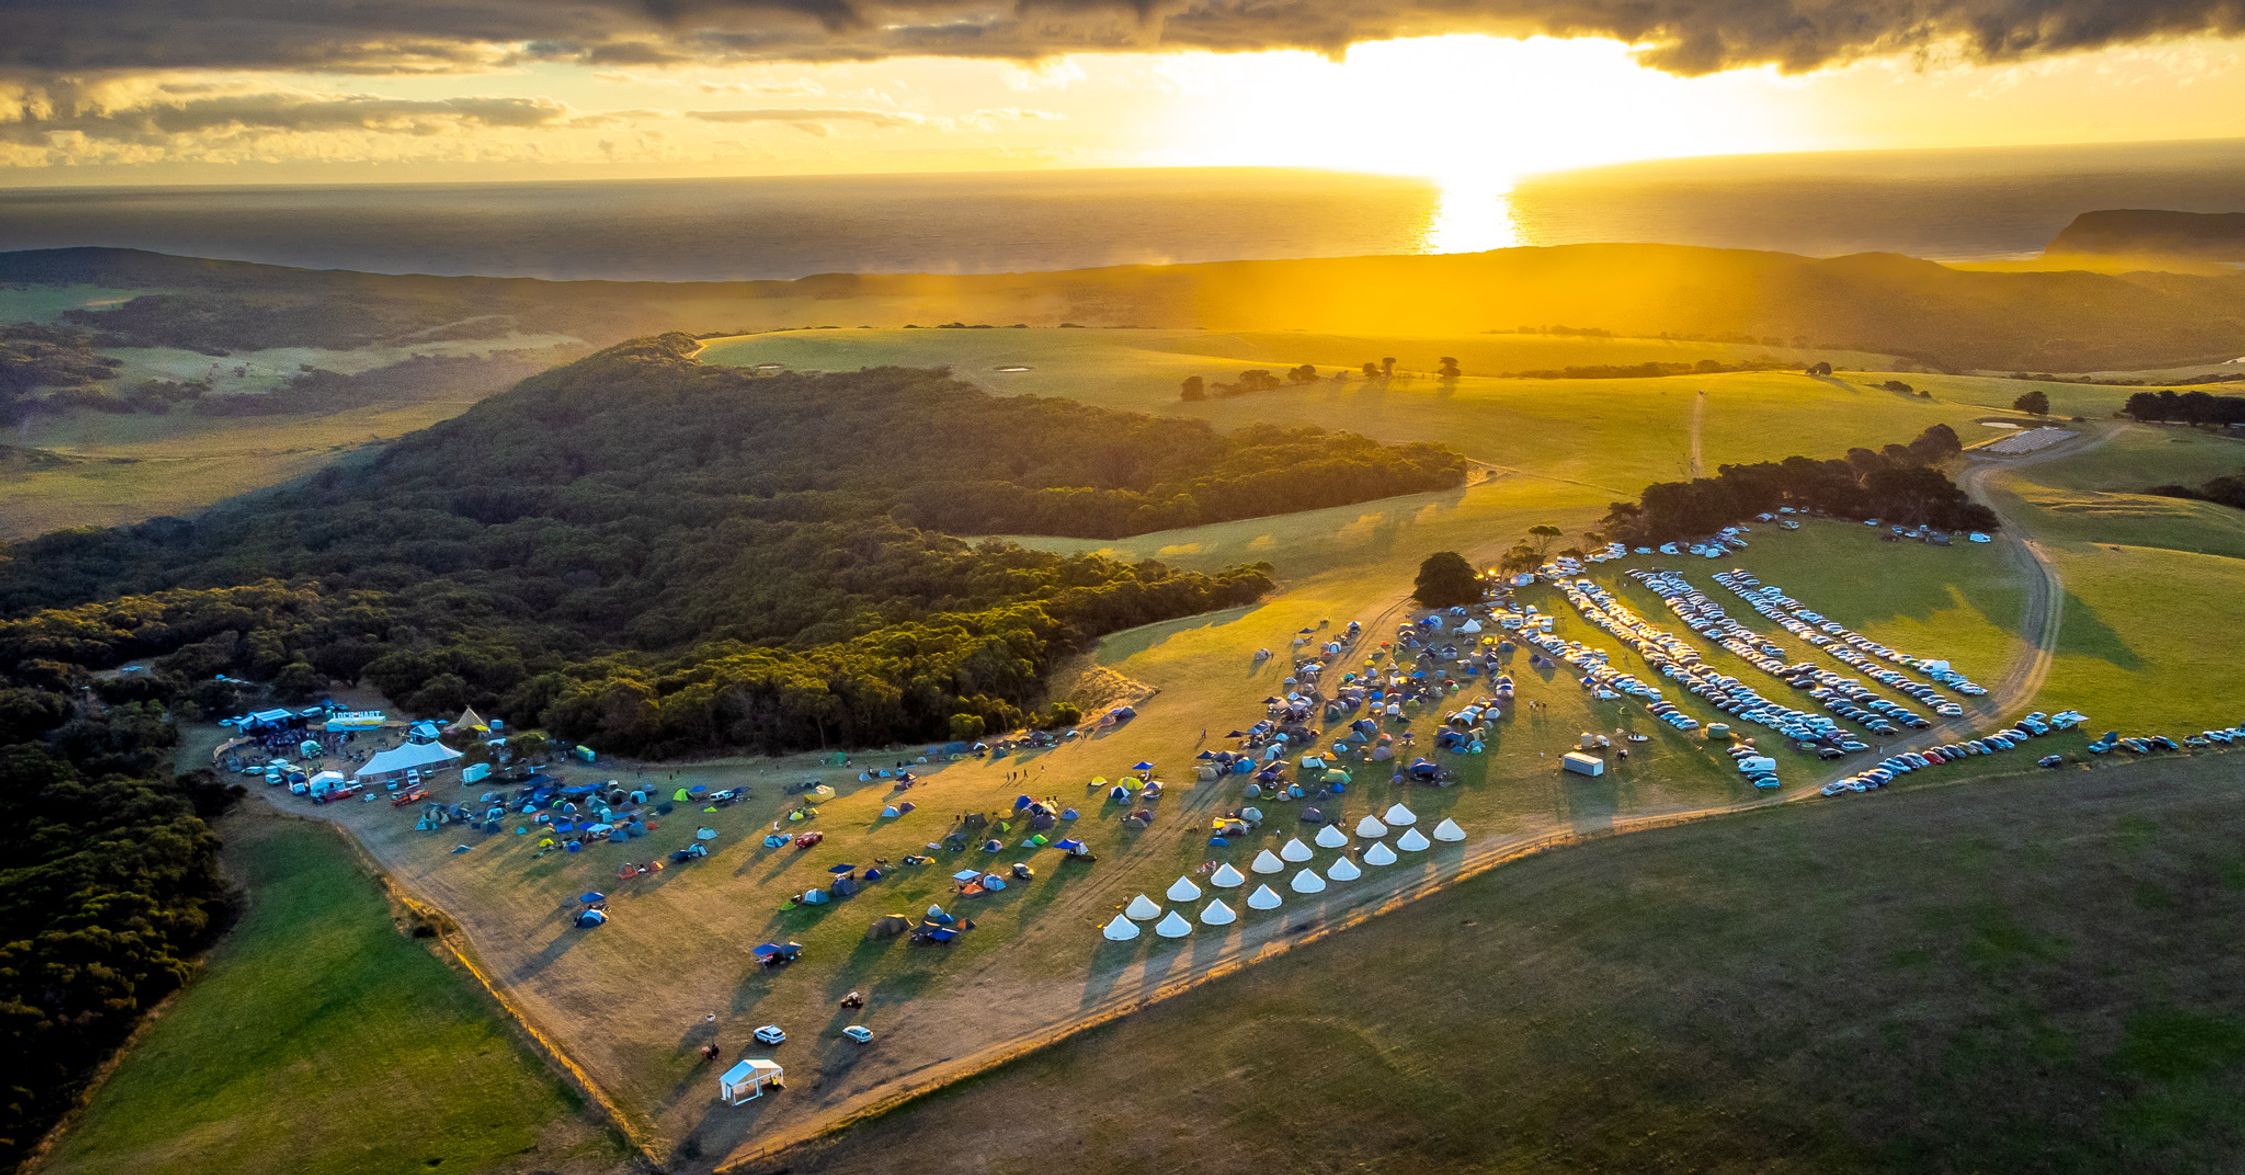 A bird's eye view of the Loch Hart festival site on green fields with the sunset in the background